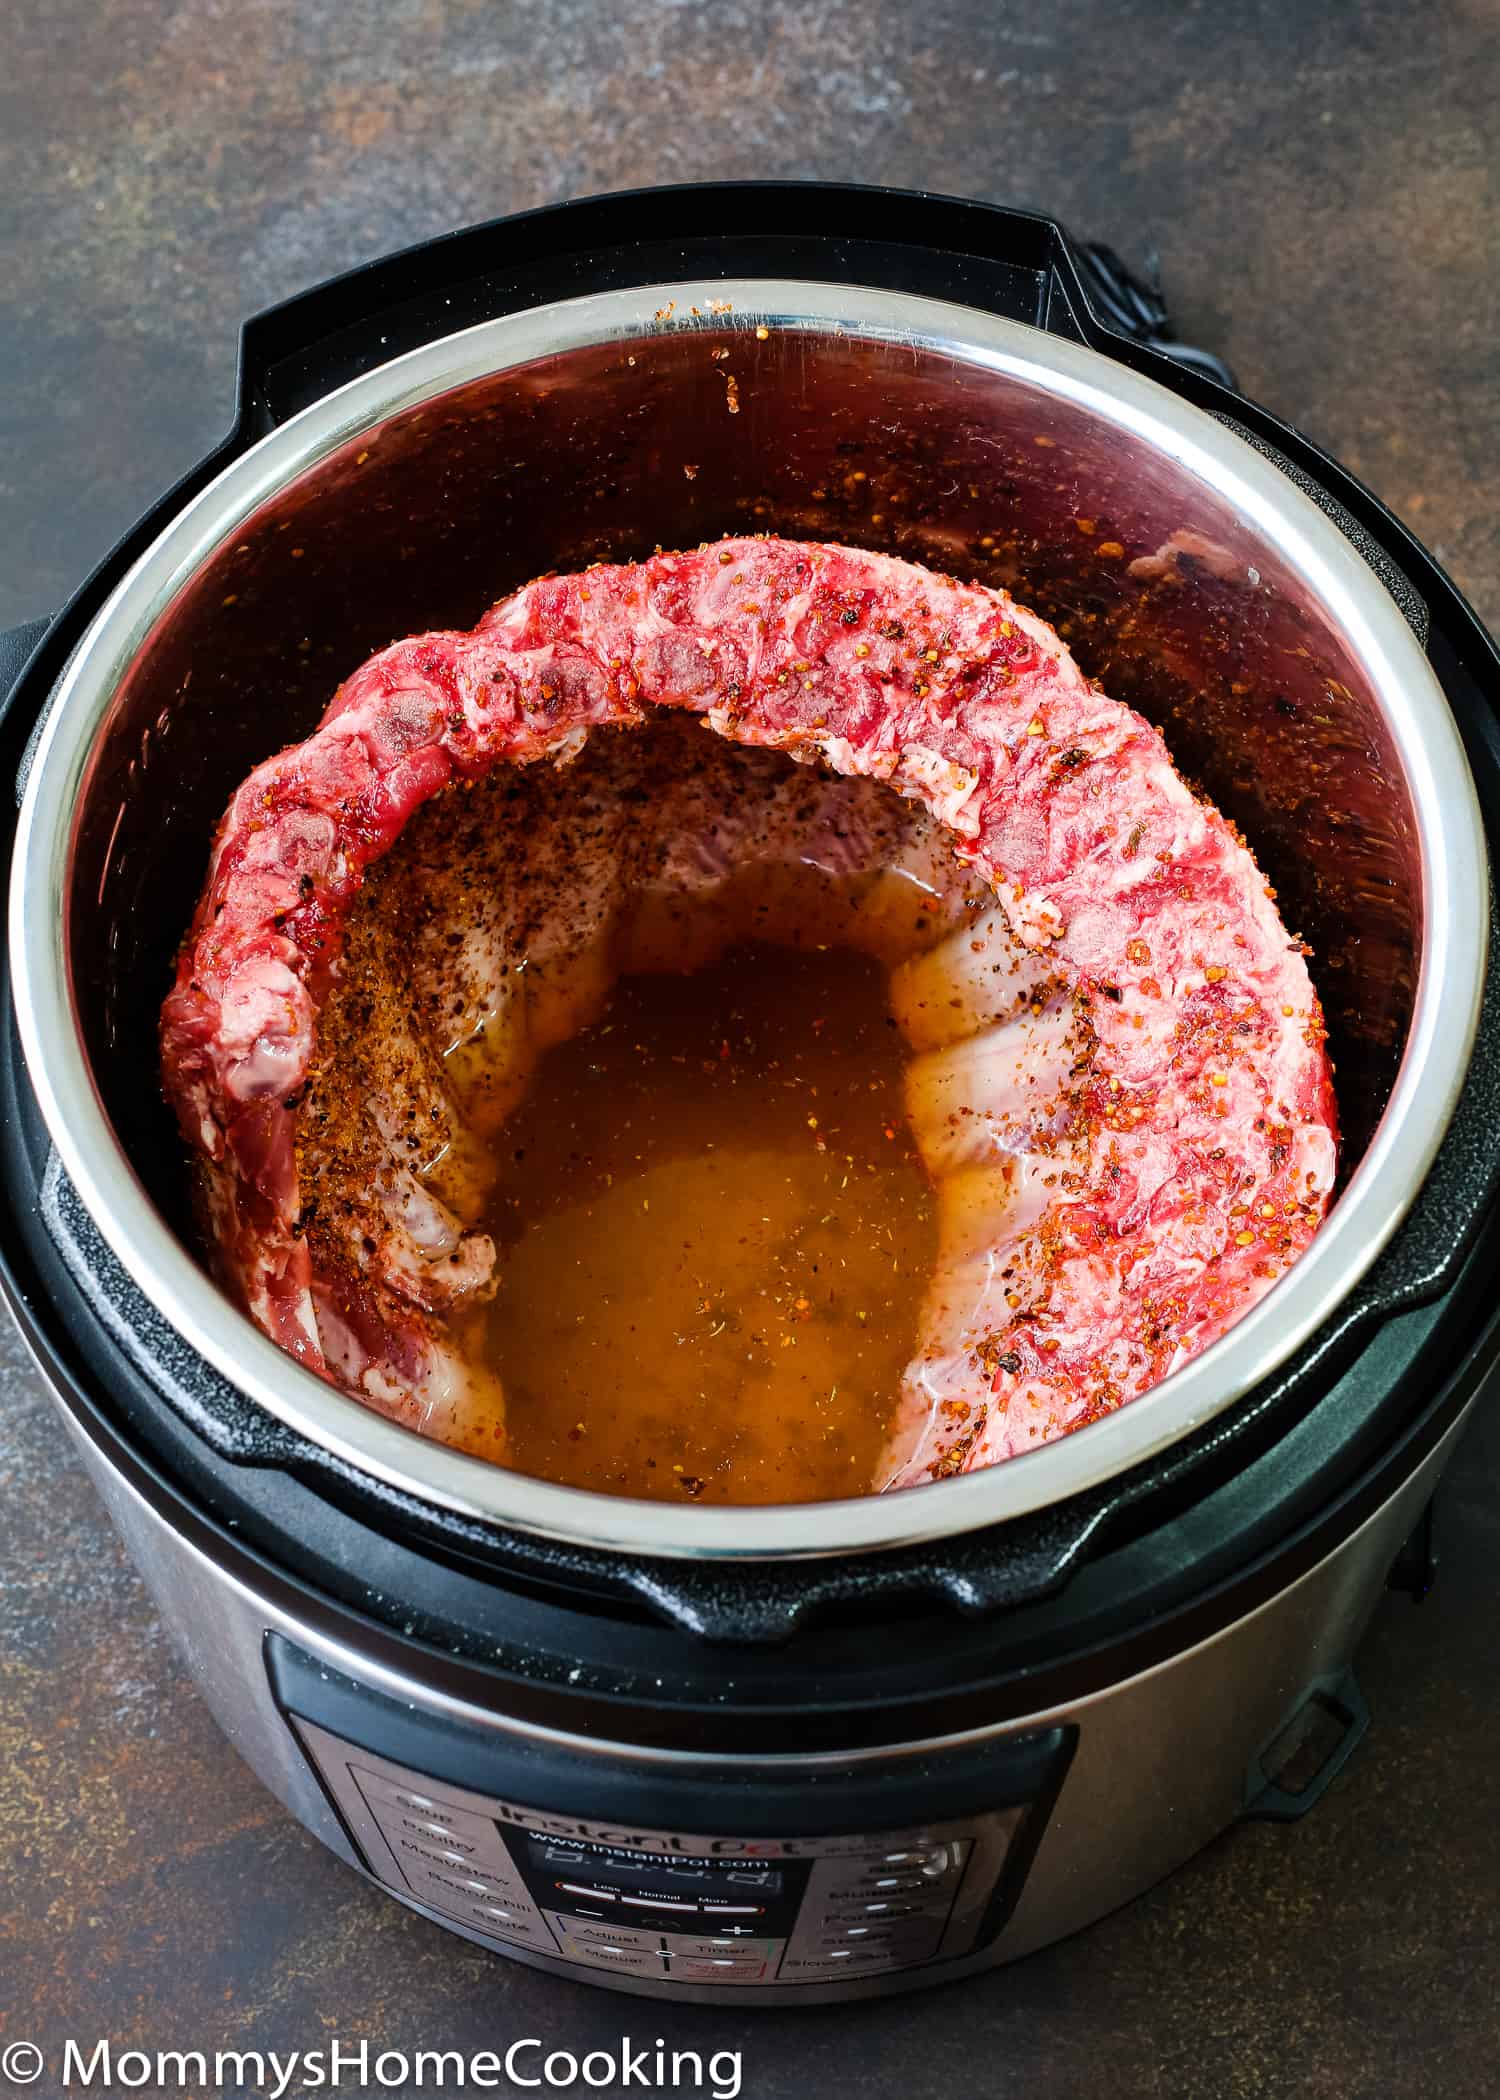 Uncooked Ribs in an instant pot pressure cooker.